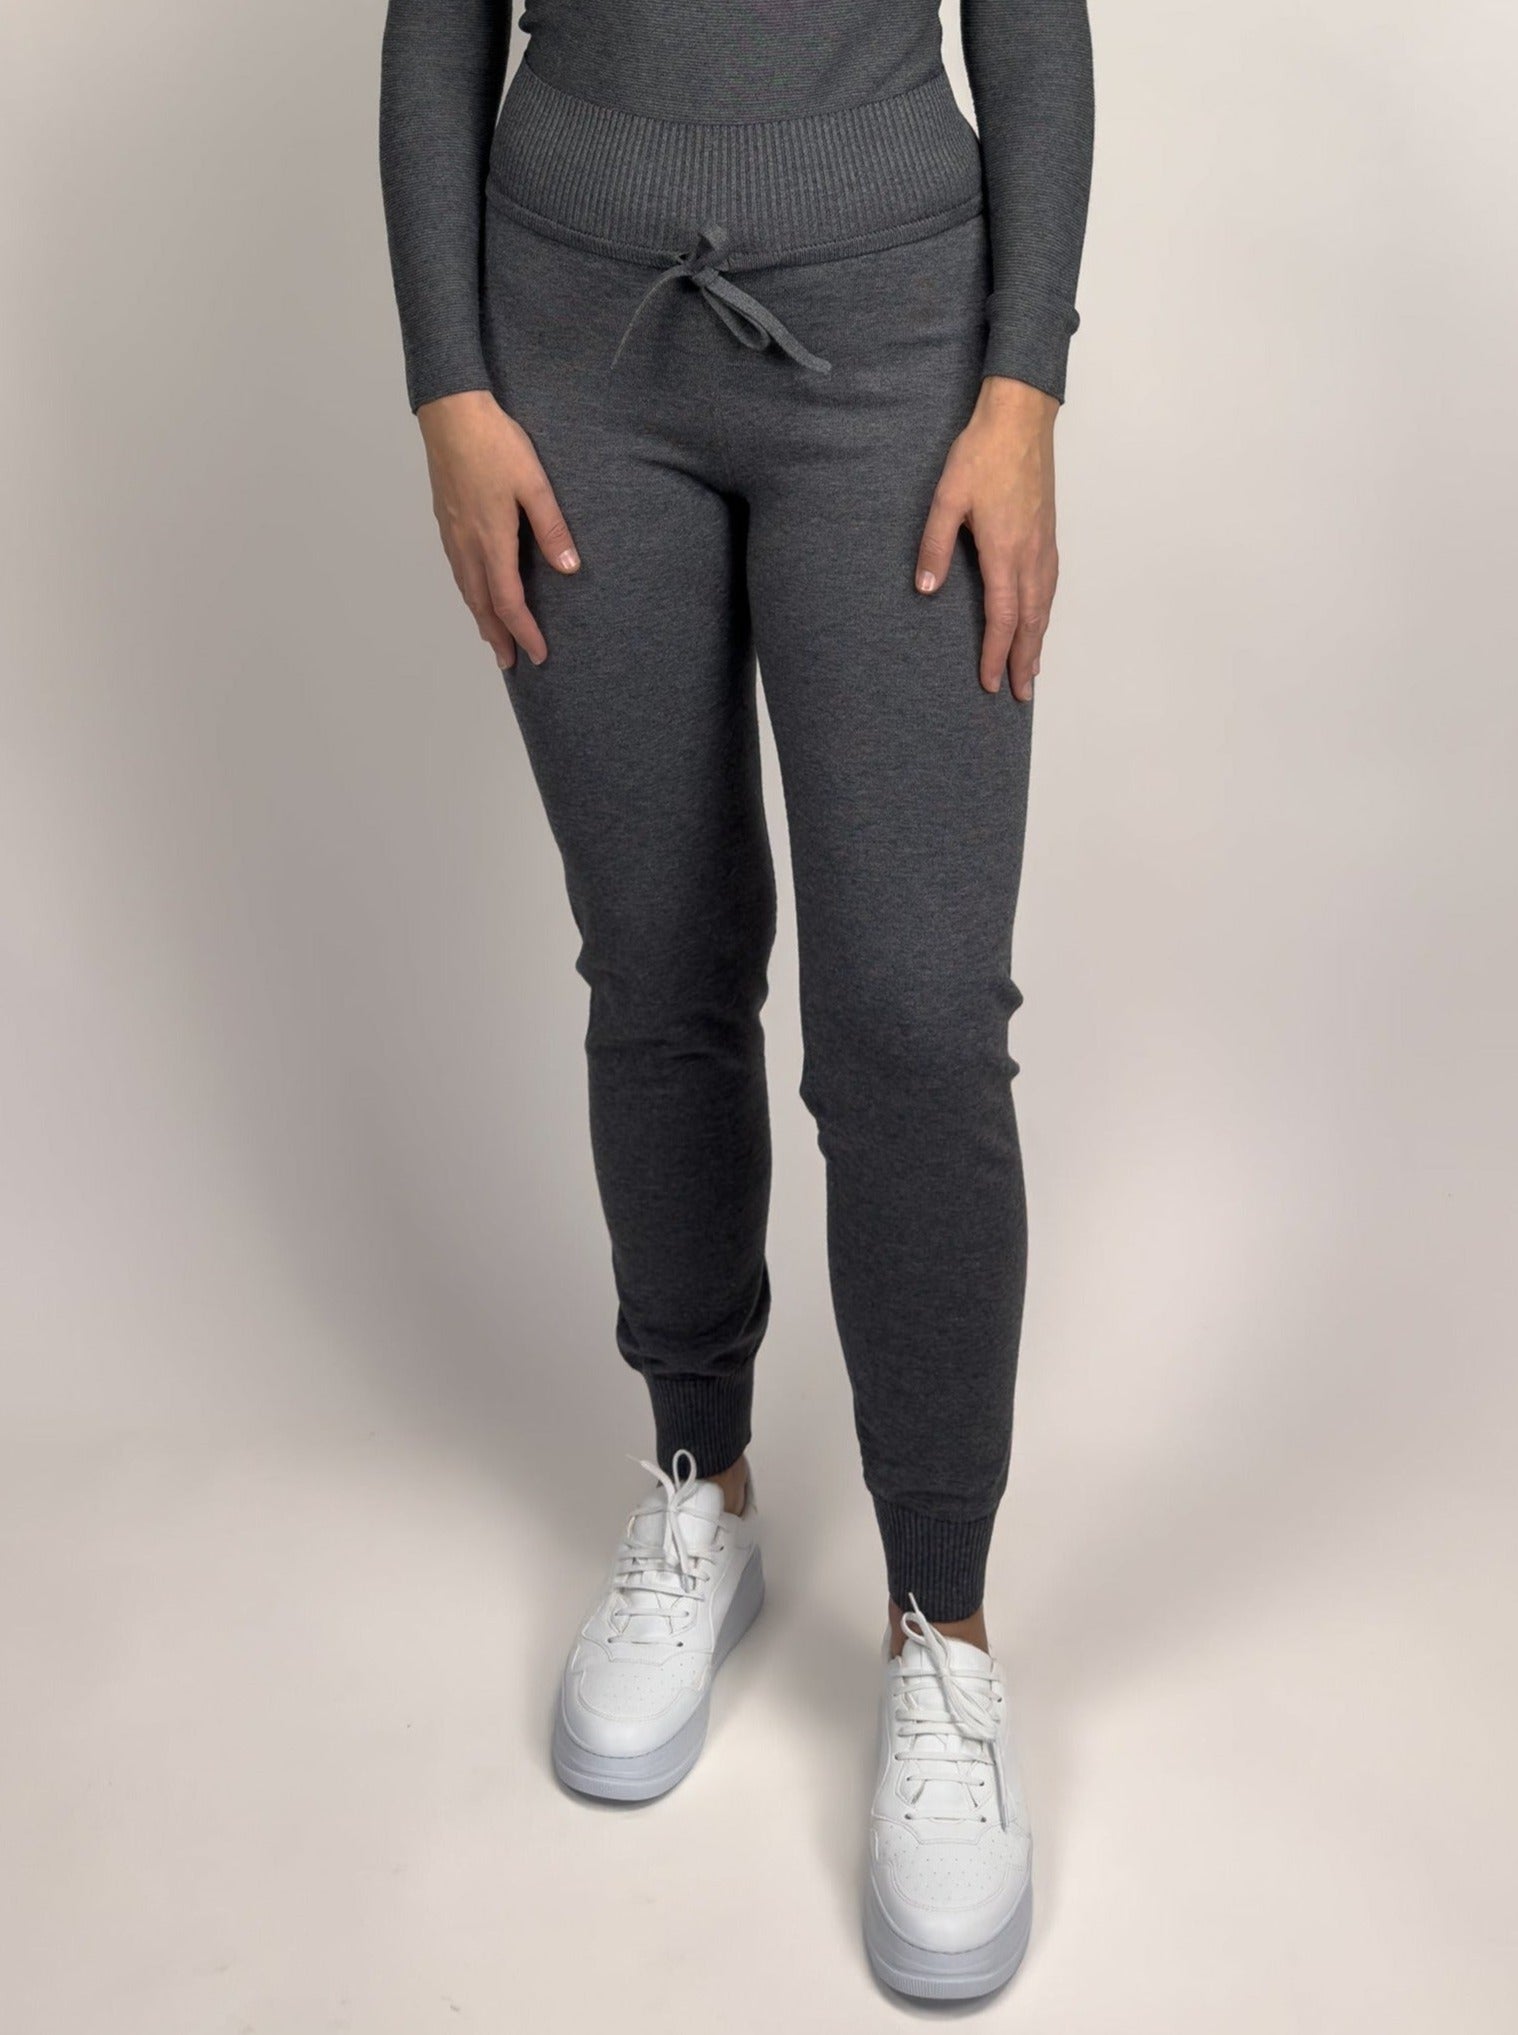 Charlotte High waist fitted viscose knit jogger